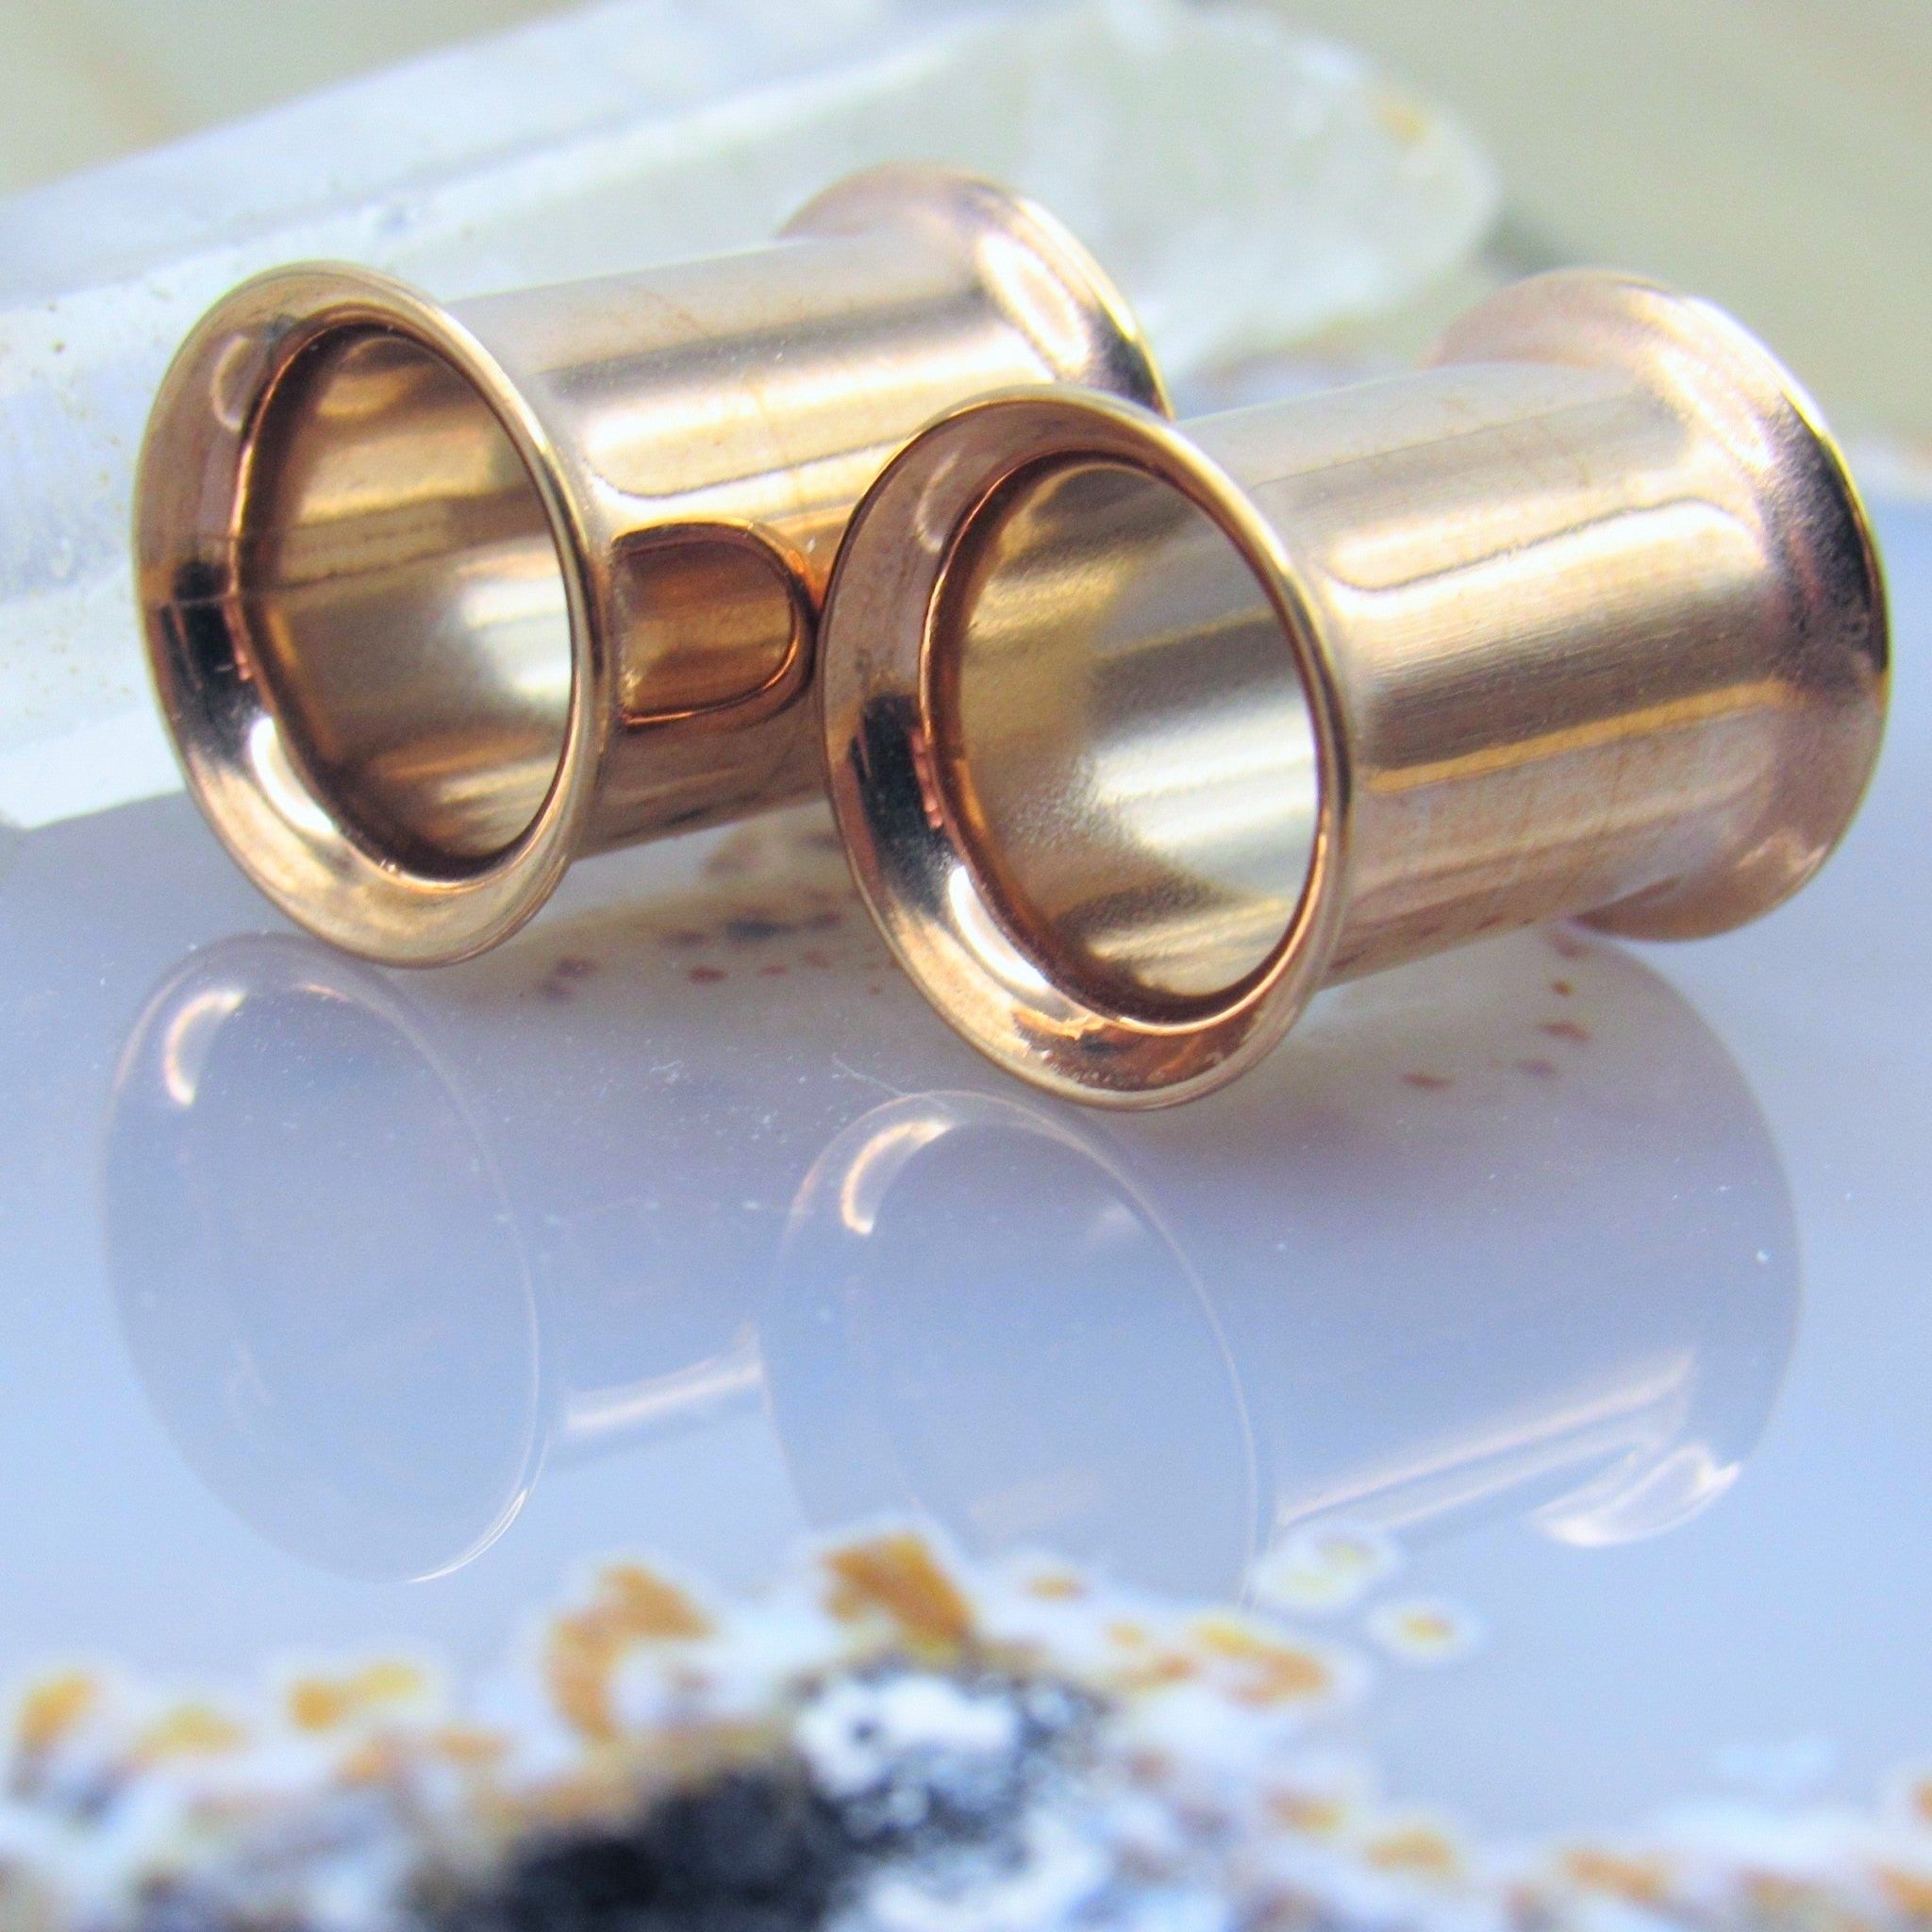 High Quality Body Piercing Jewelry Styles in Titanium, Stainless